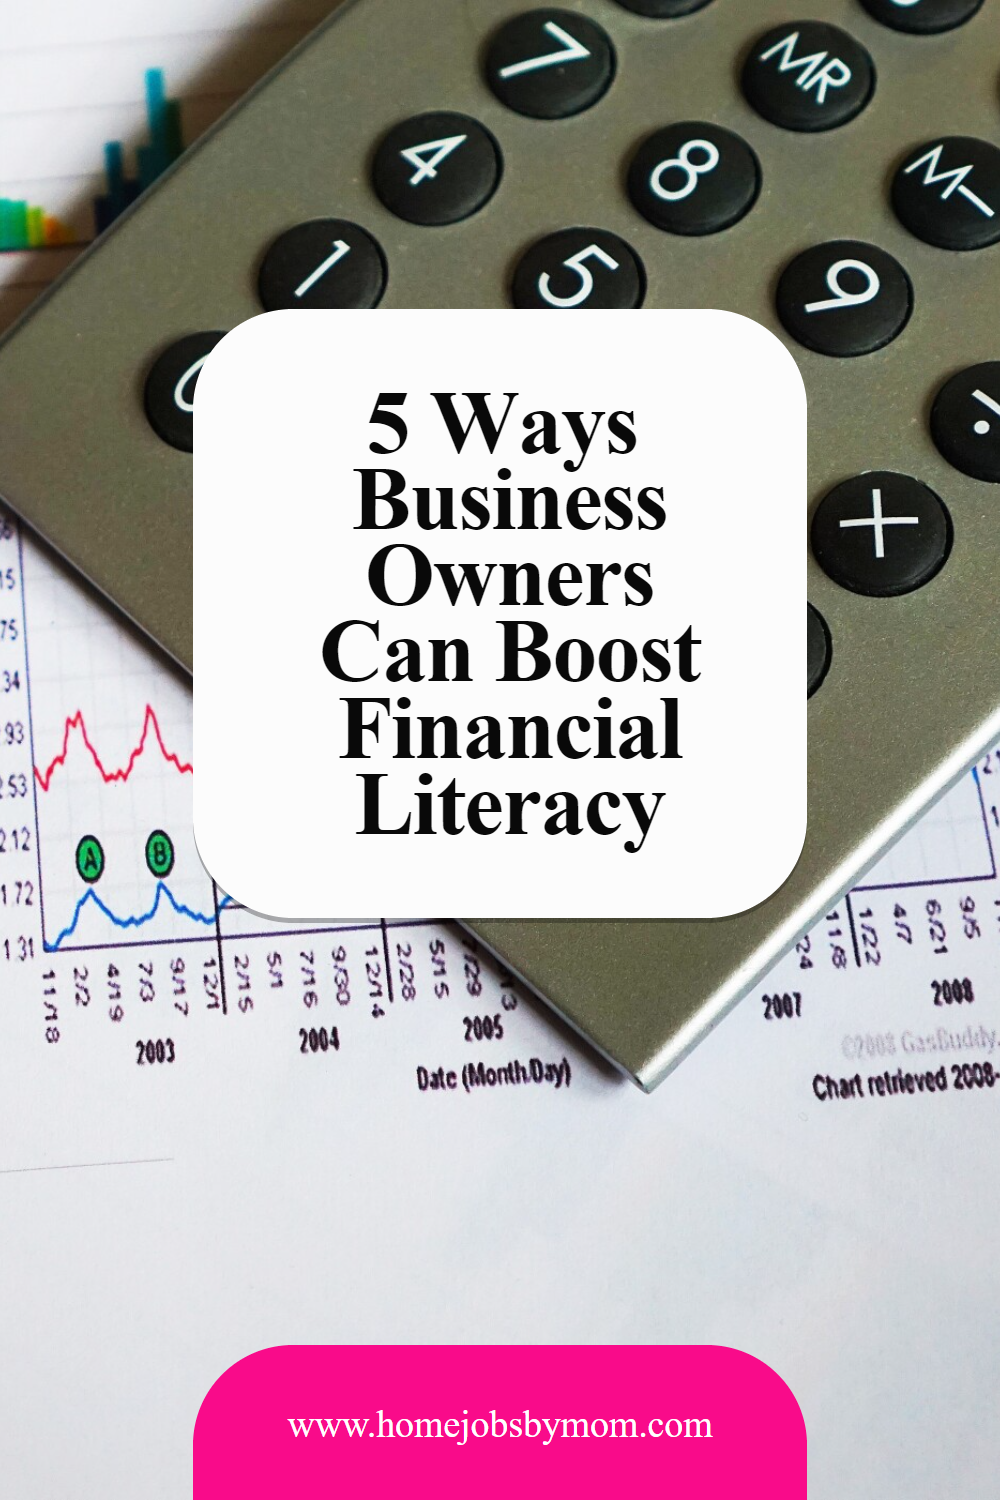 5 Ways Business Owners Can Boost Financial Literacy